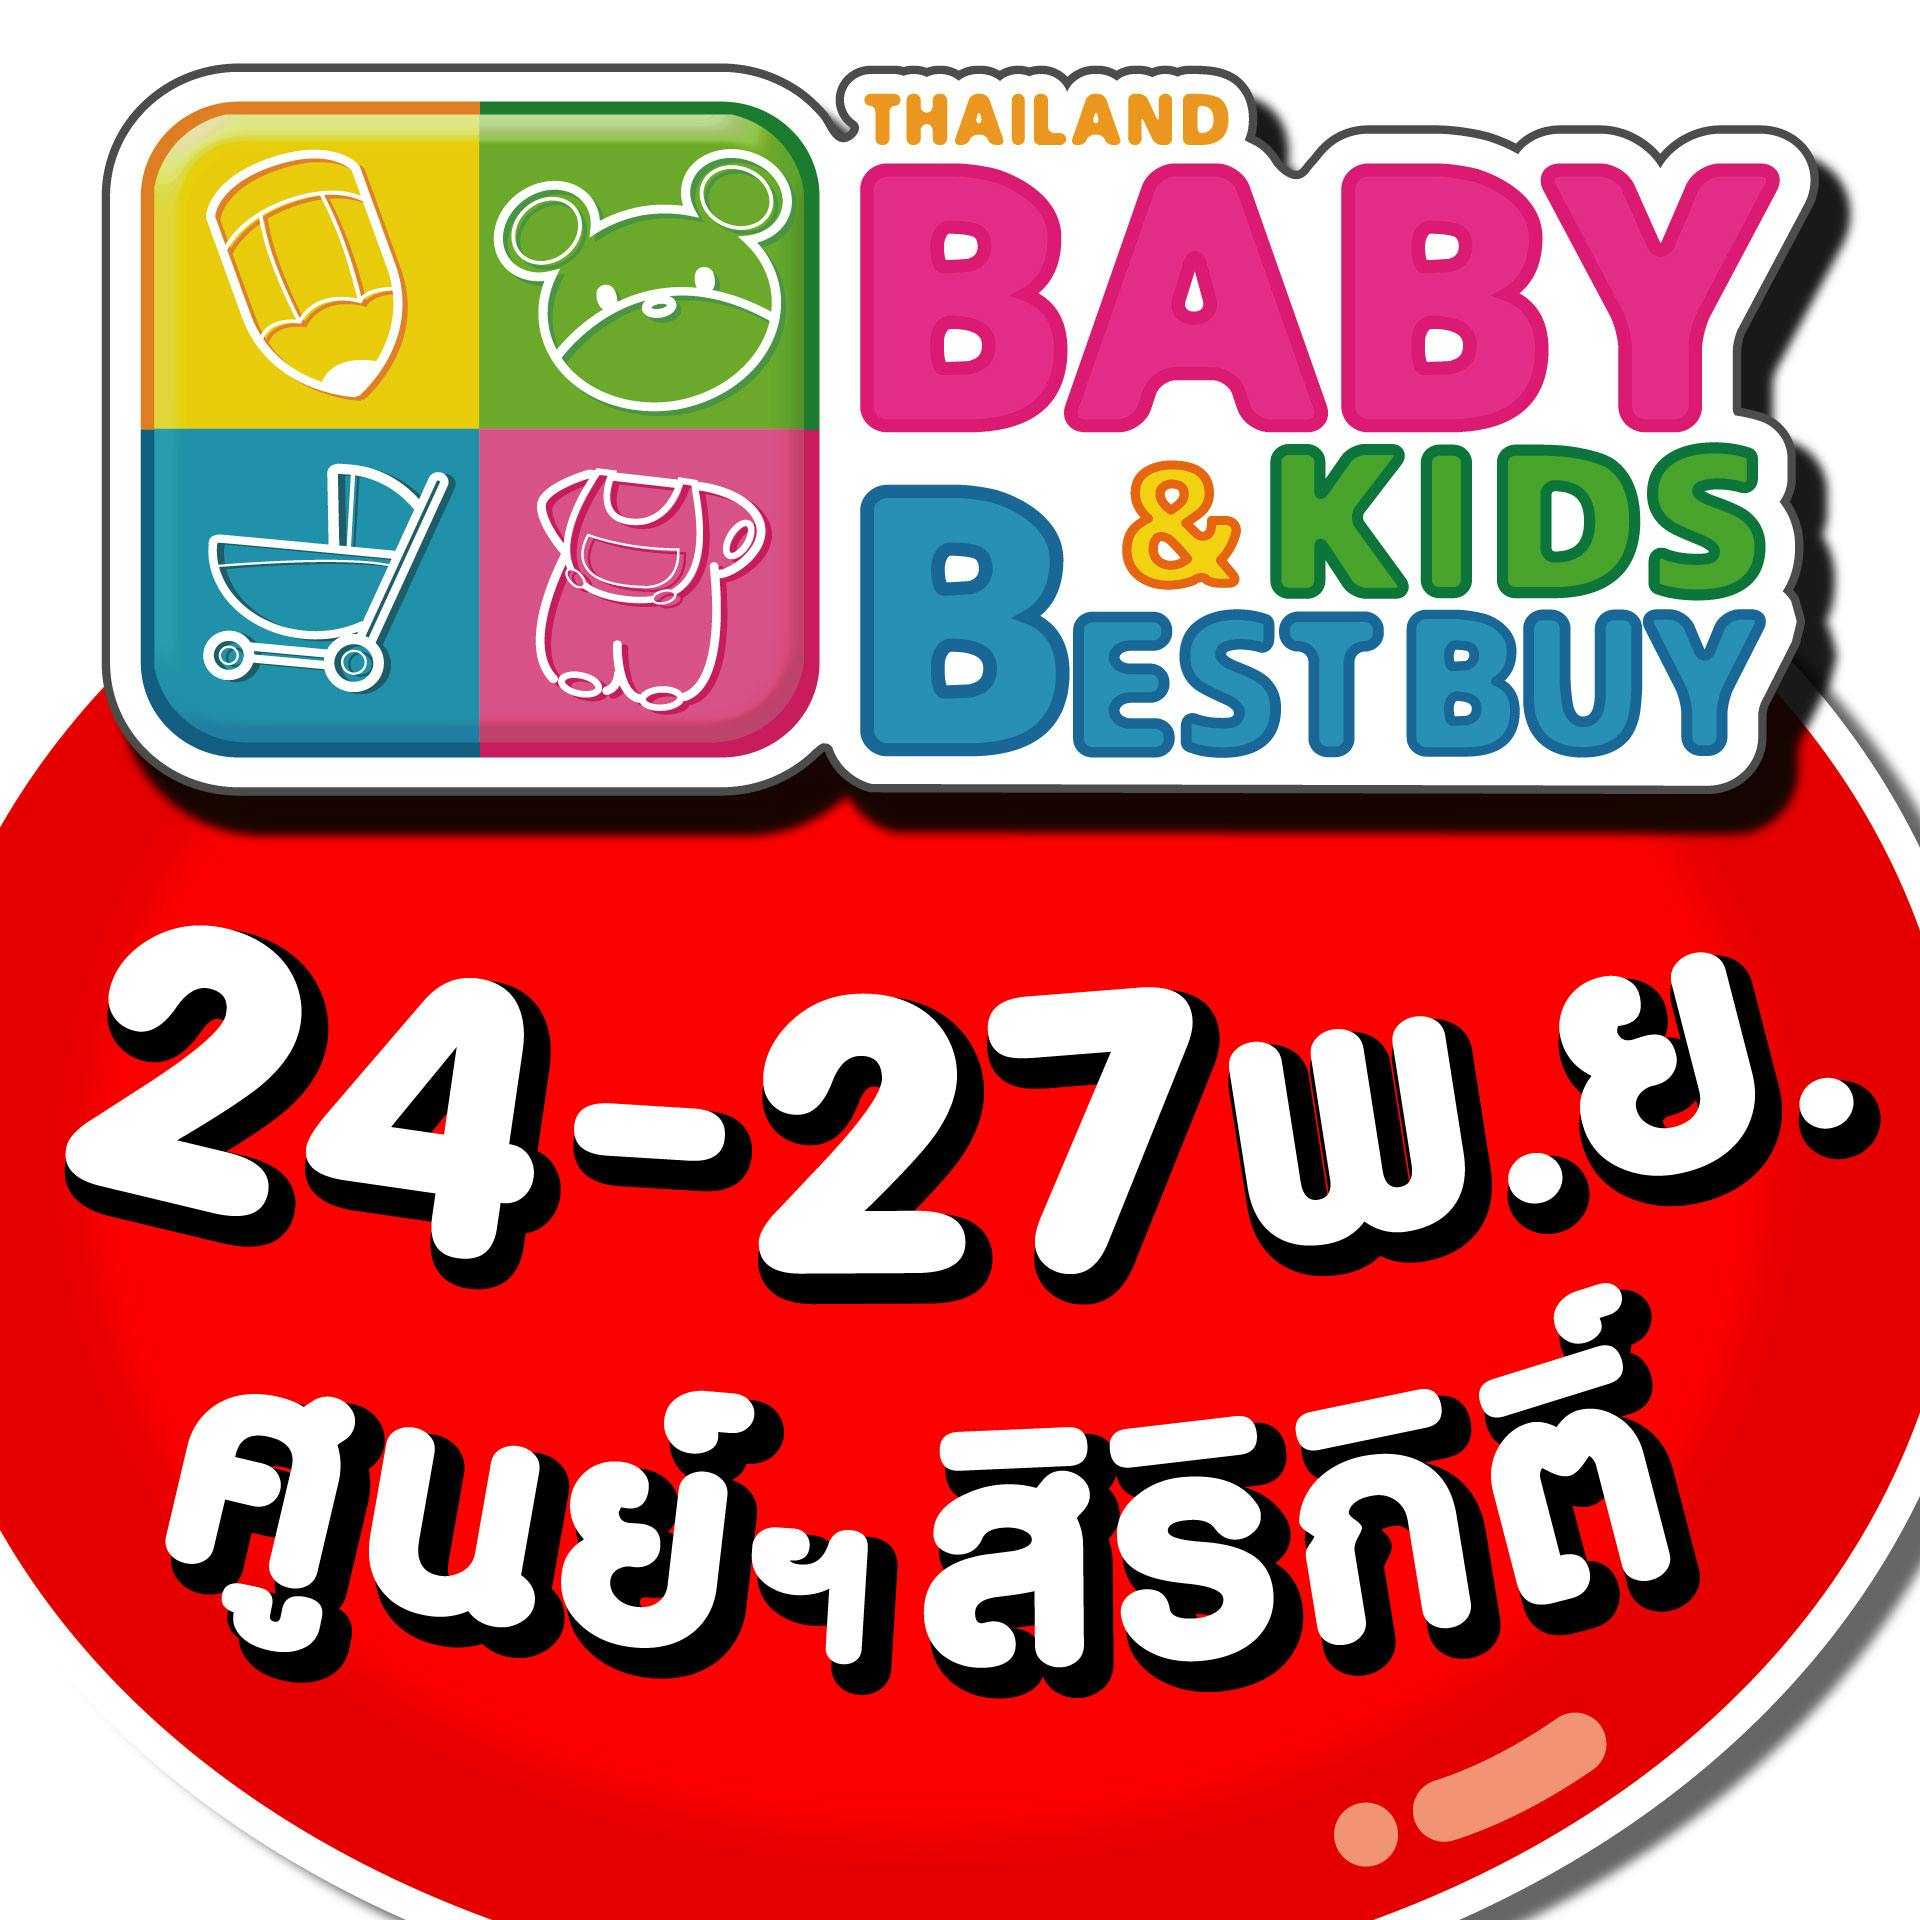 Thailand Baby and Kids Best Buy ครั้งที่ 44